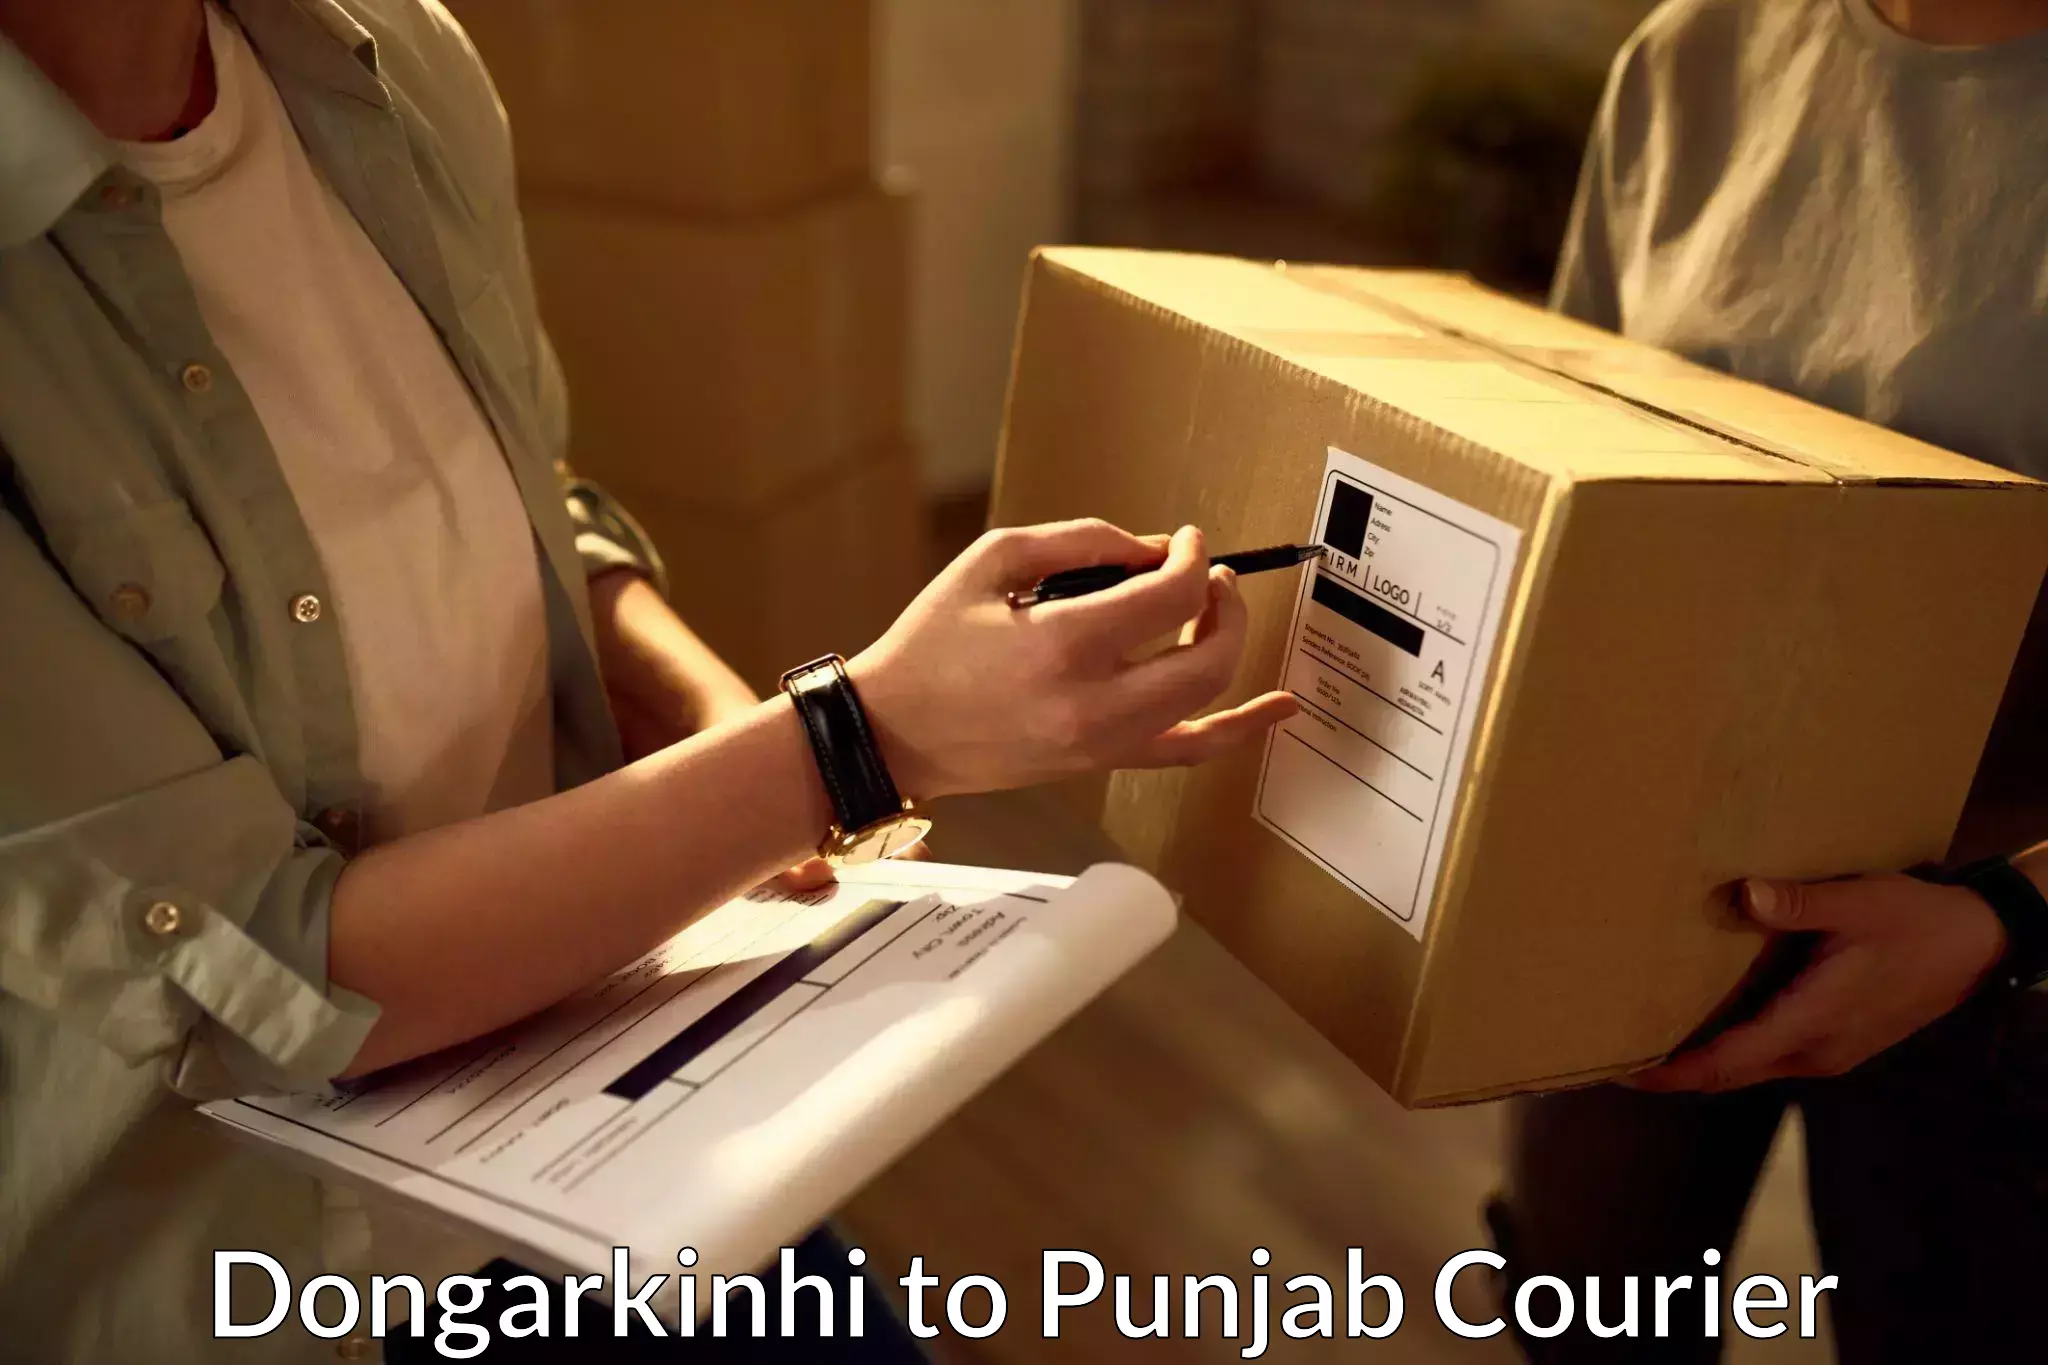 Emergency parcel delivery in Dongarkinhi to Pathankot